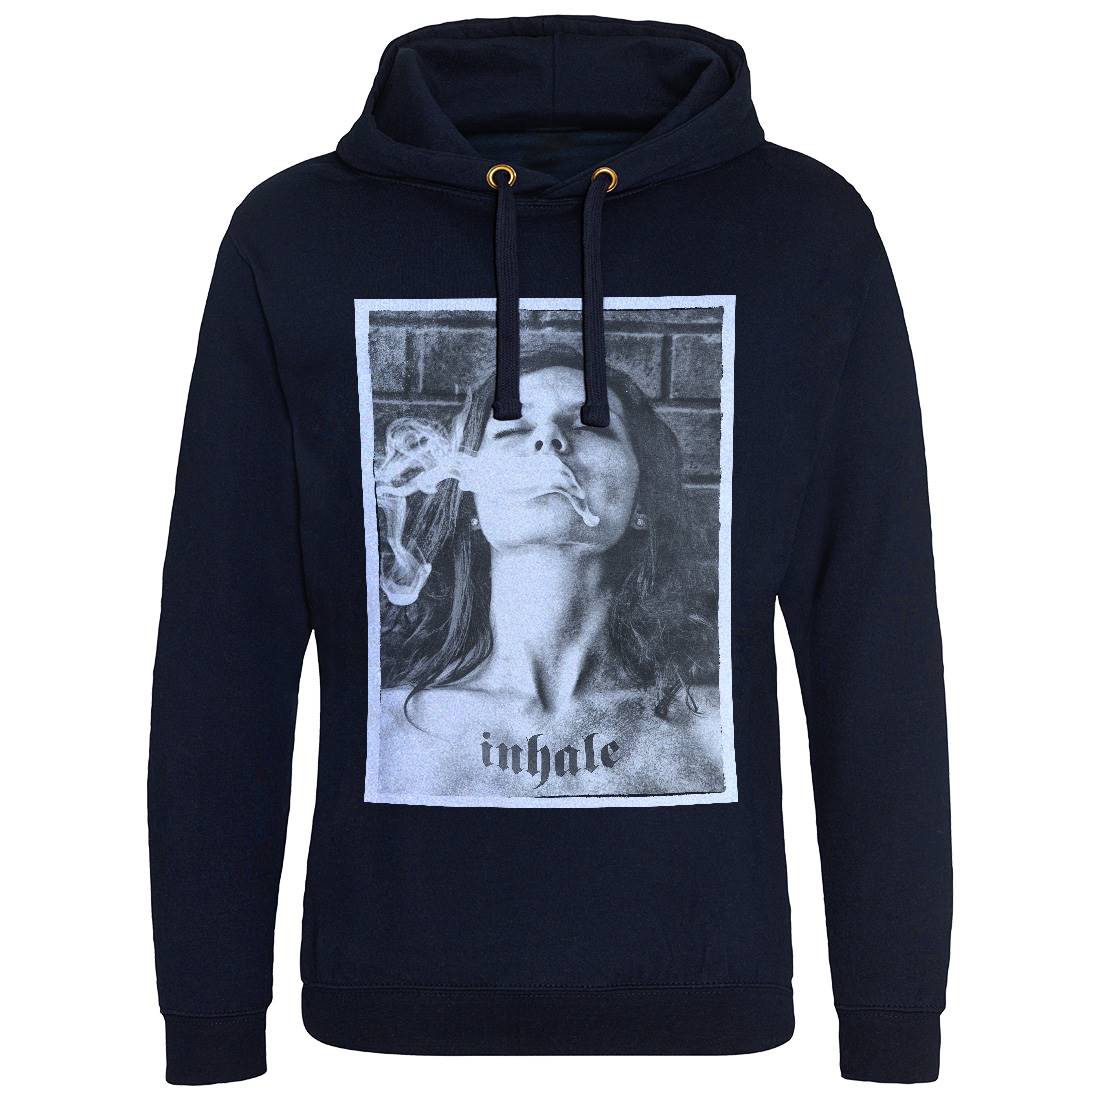 Inhale Mens Hoodie Without Pocket Drugs A851